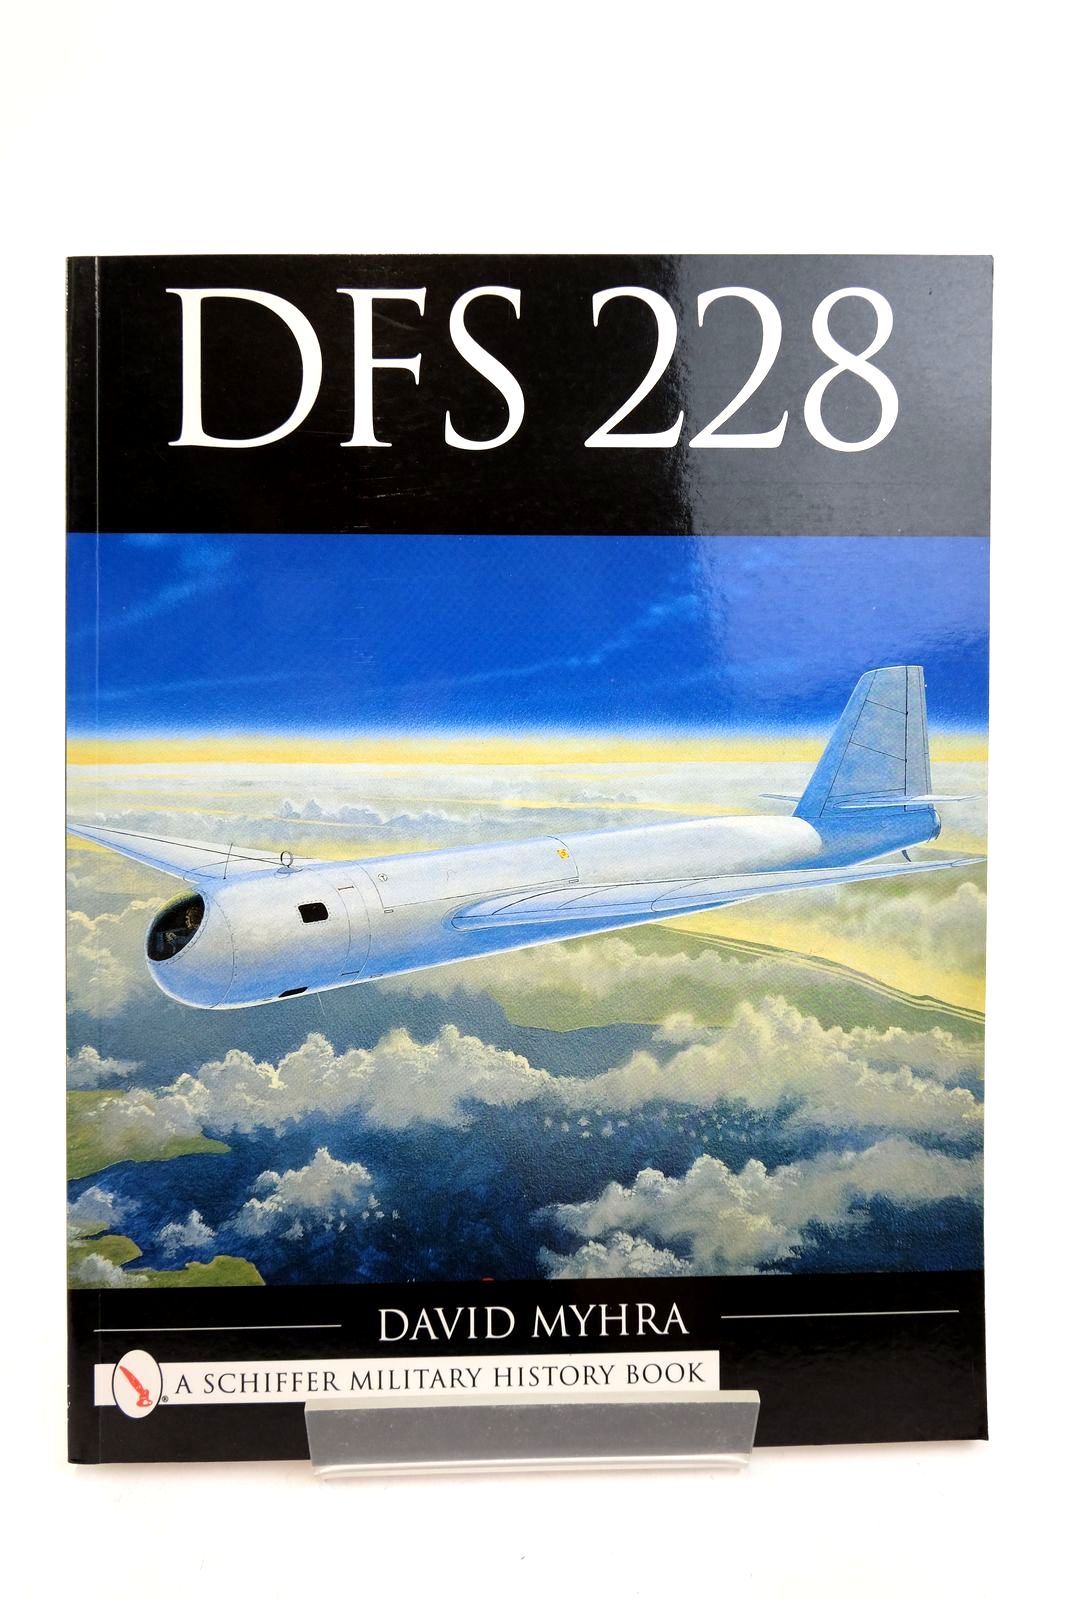 Photo of DFS 228 written by Myhra, David published by Schiffer Military History (STOCK CODE: 2139373)  for sale by Stella & Rose's Books